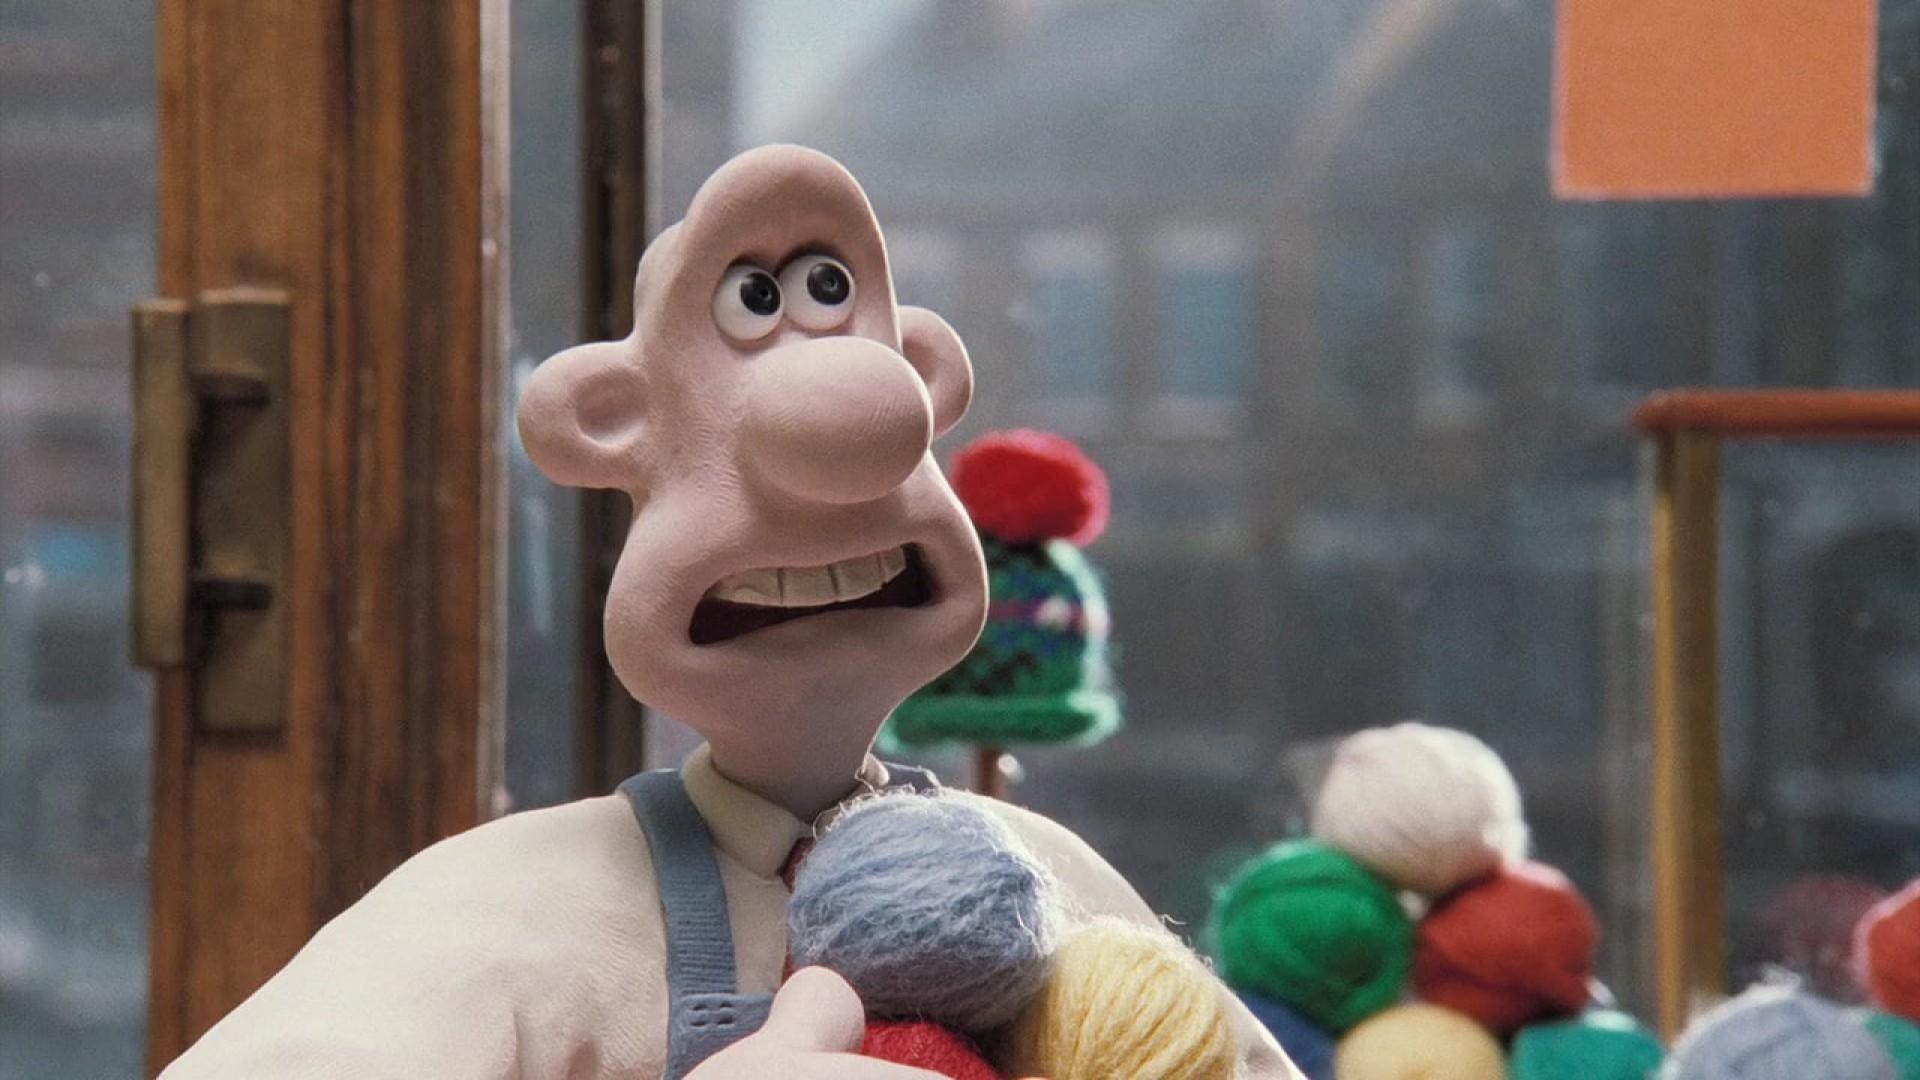 Wallace & Gromit in Three Amazing Adventures